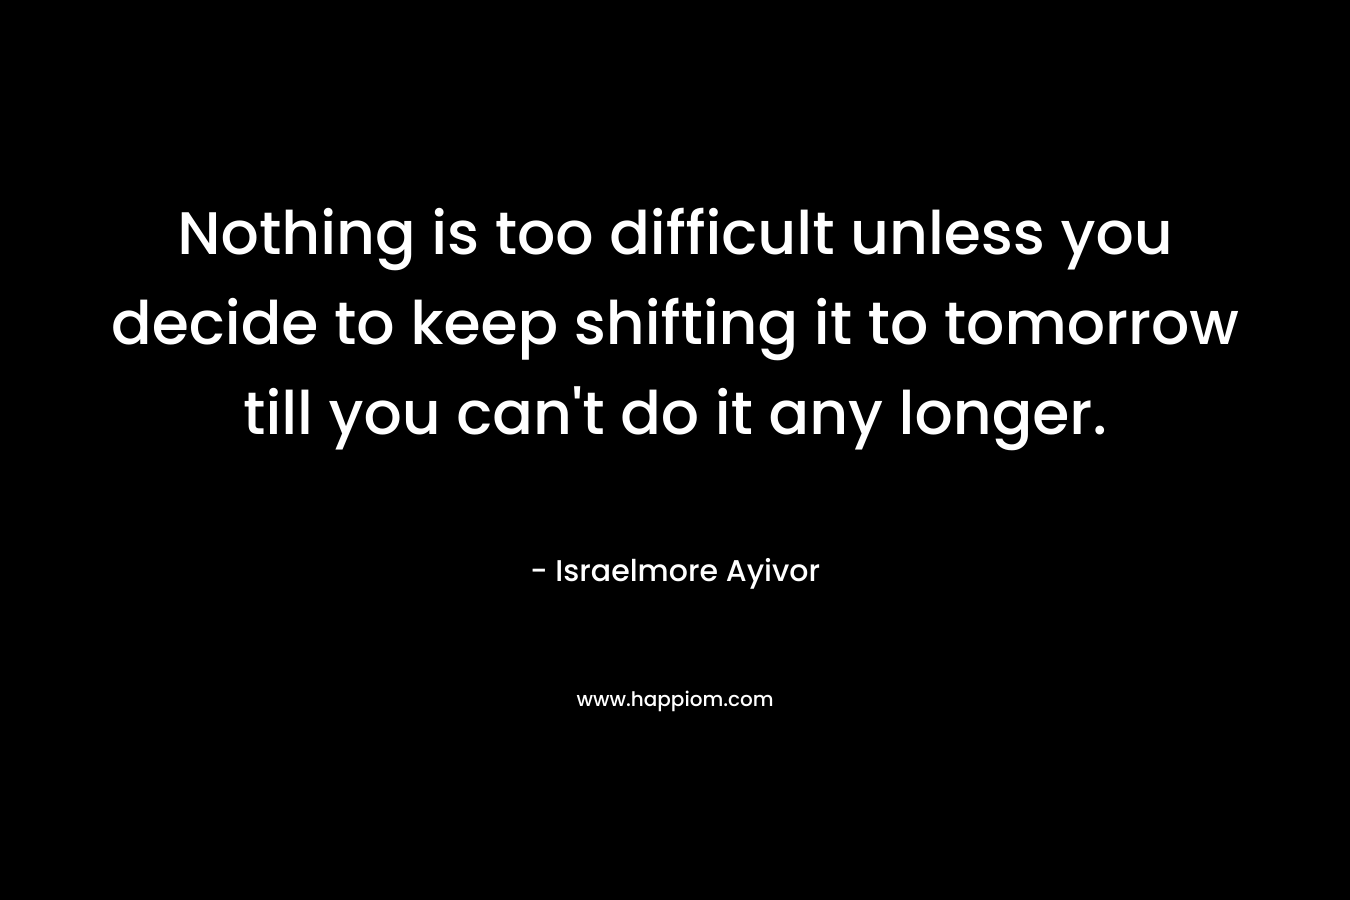 Nothing is too difficult unless you decide to keep shifting it to tomorrow till you can't do it any longer.